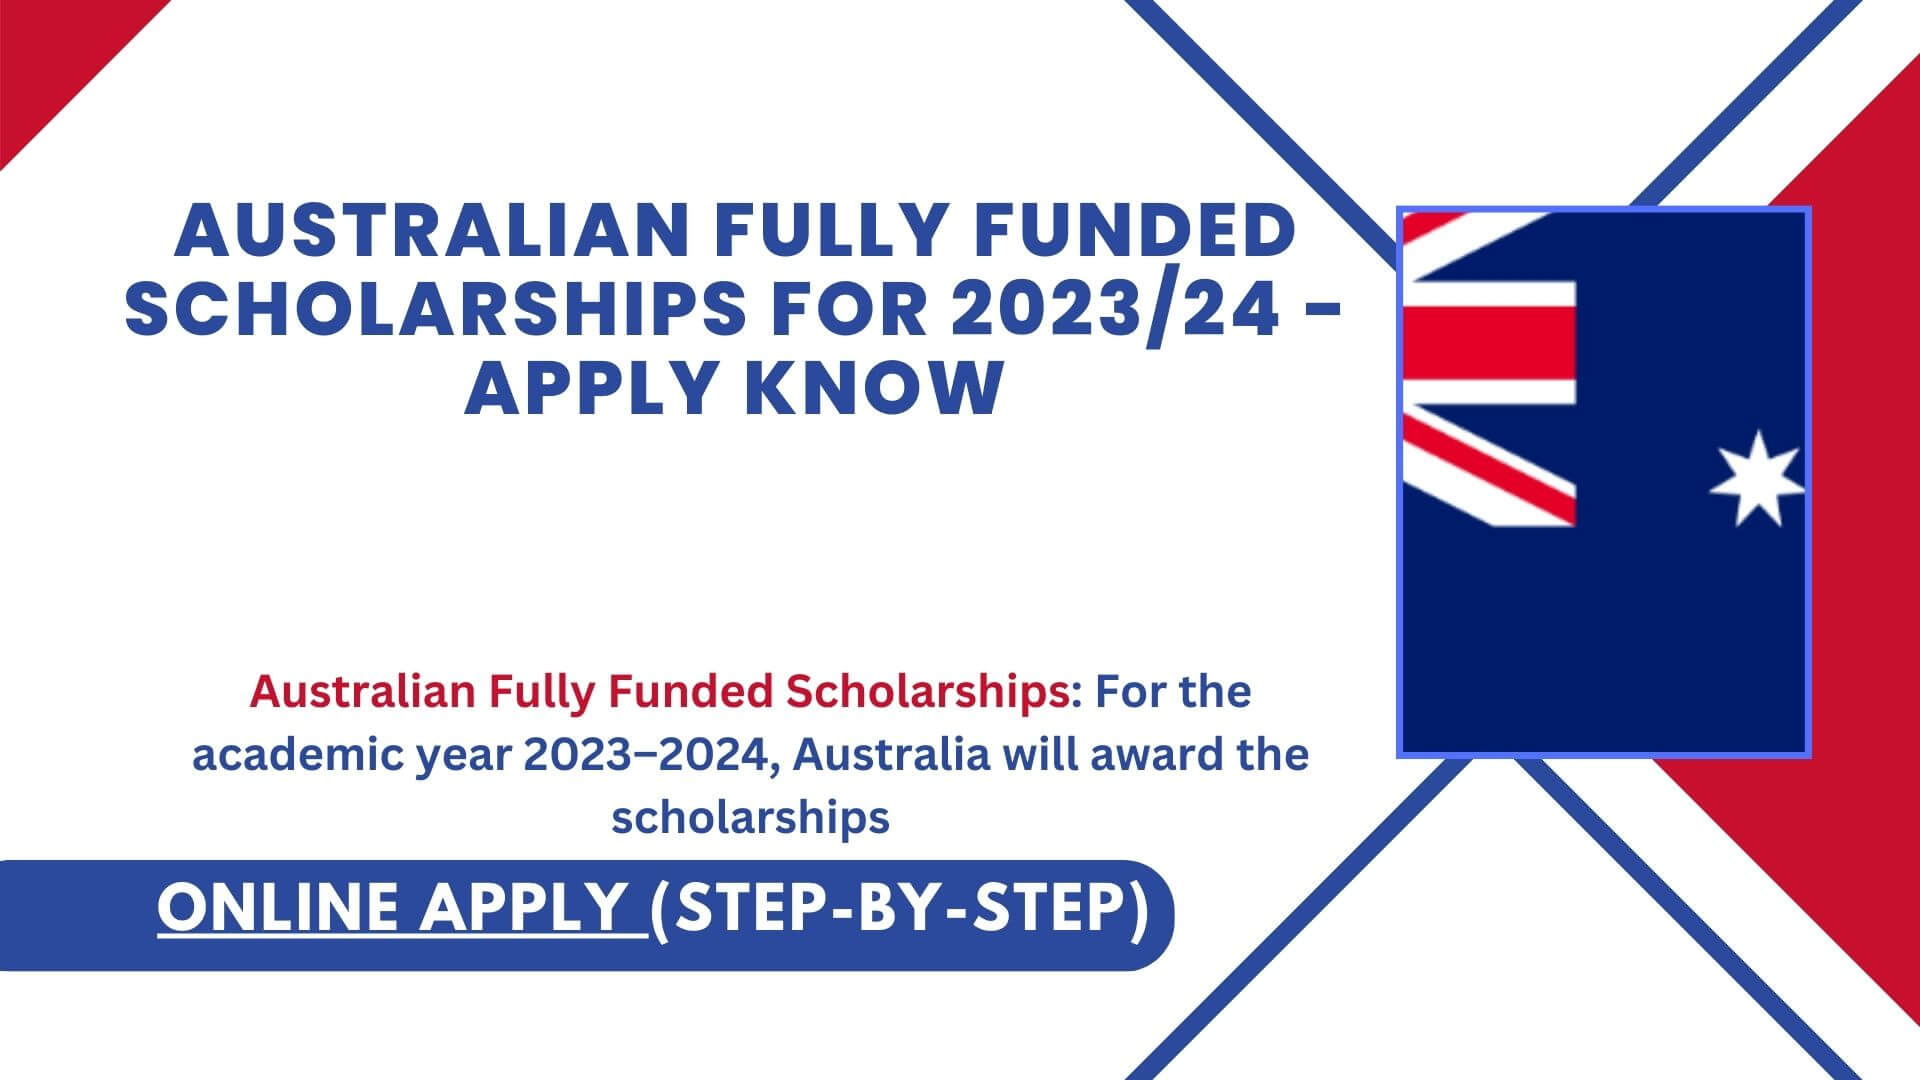 Australian Fully Funded Scholarships for 202324 - Apply Know